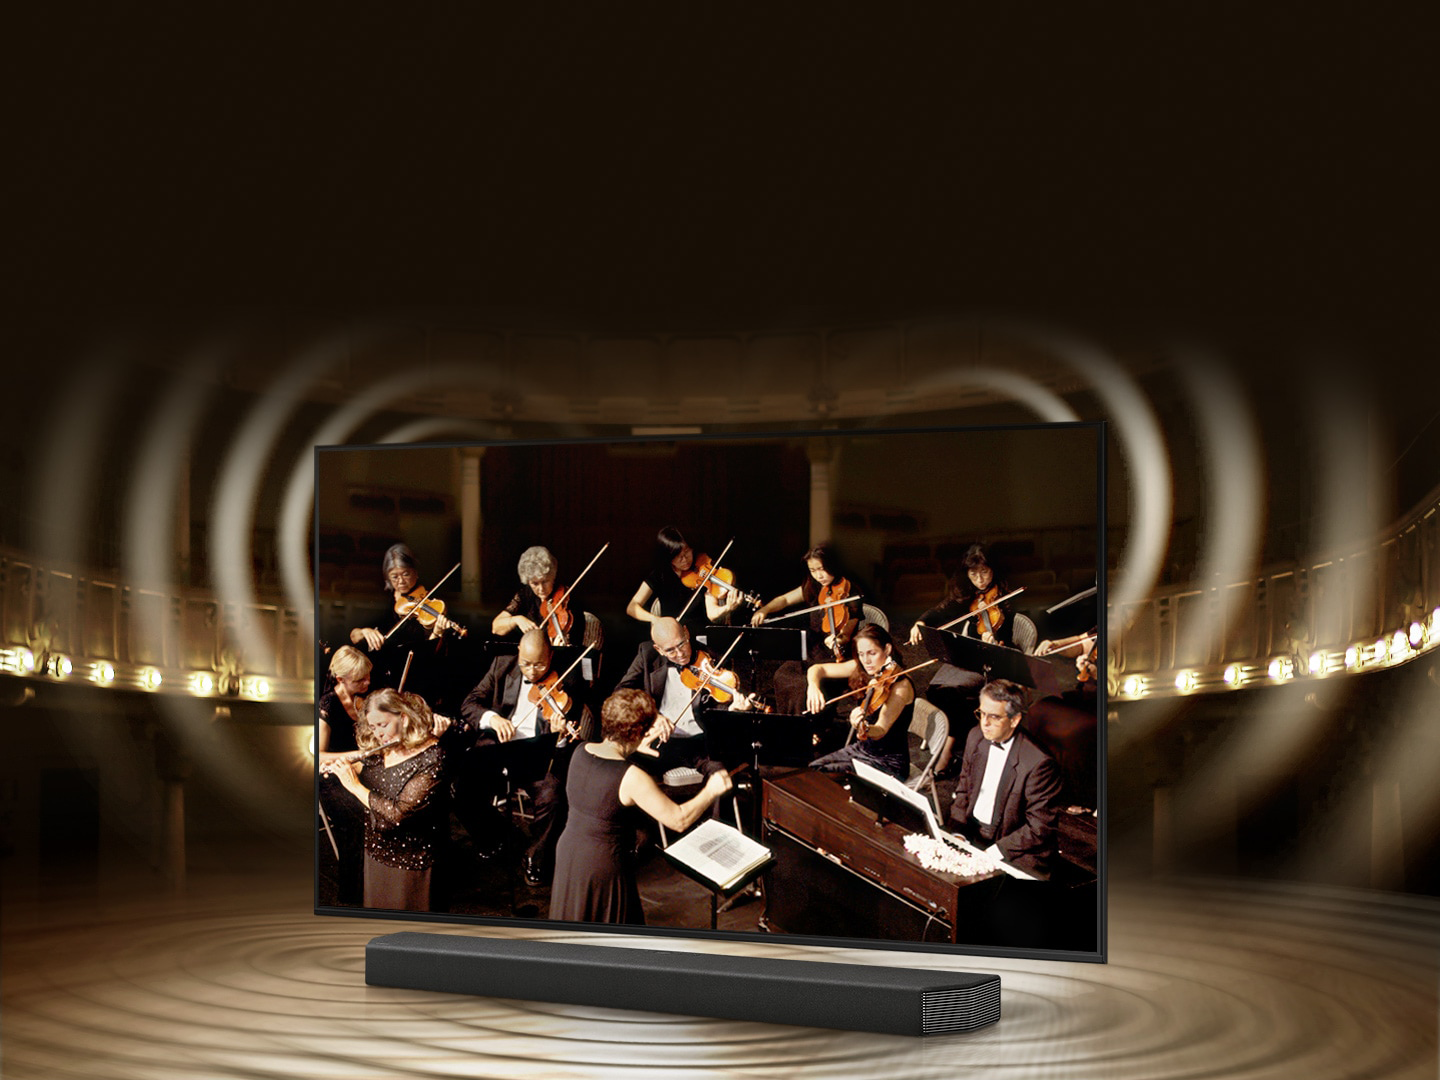  levant-feature-tv-and-soundbar-orchestrated-in-perfect-harmony-393067054